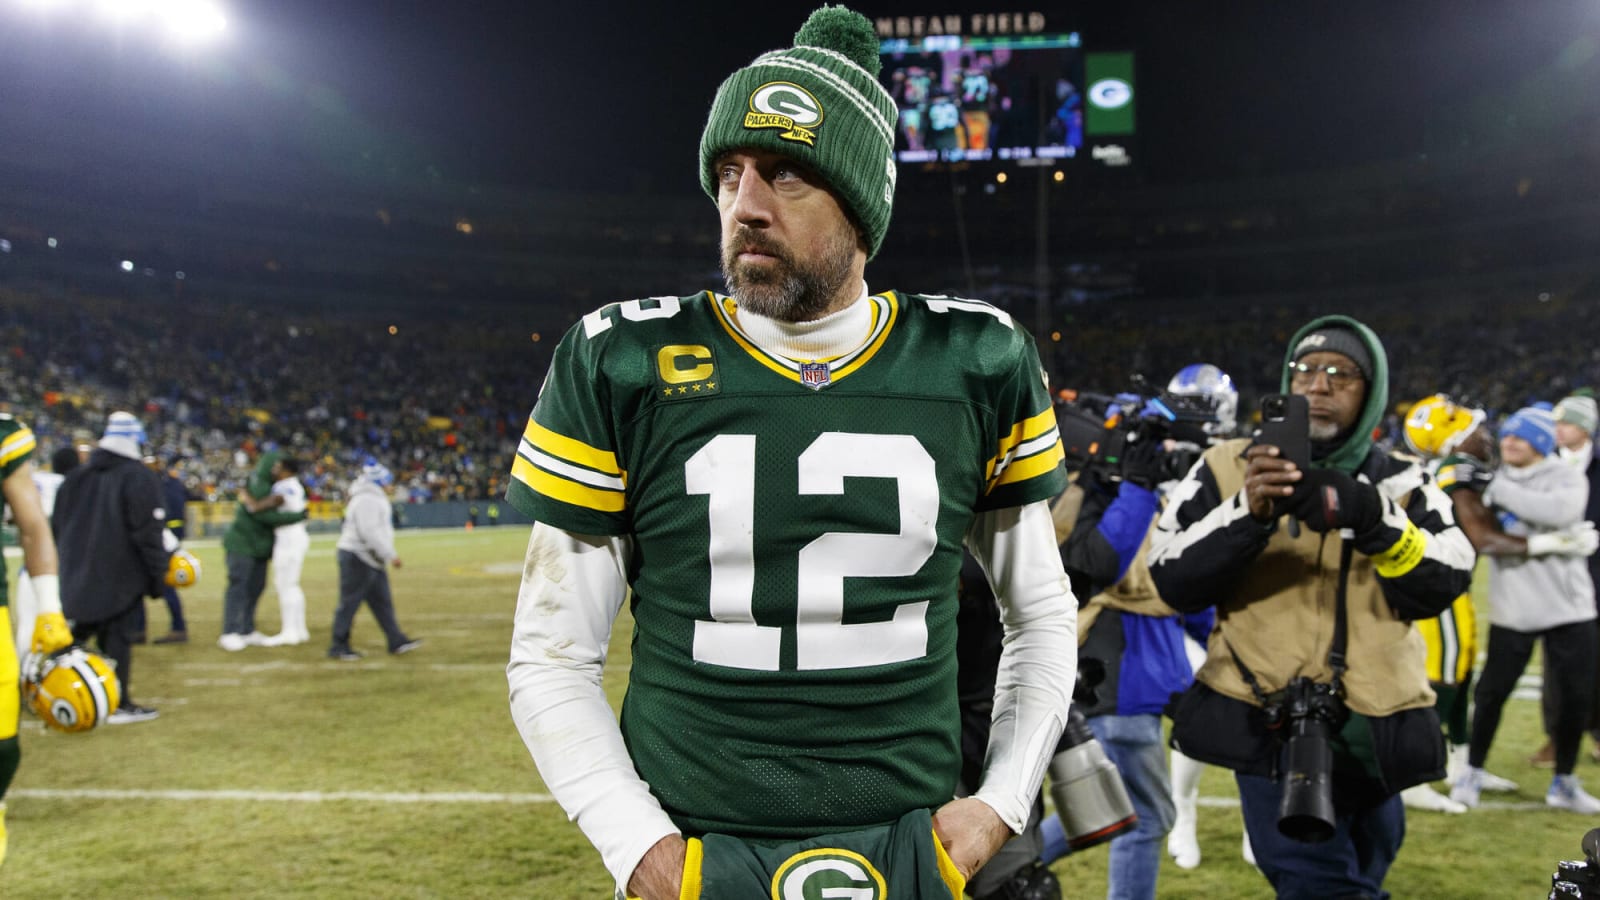 2023 NFL Draft: How Aaron Rodgers Trade Impacts Jets and Packers Draft  Strategy - Visit NFL Draft on Sports Illustrated, the latest news coverage,  with rankings for NFL Draft prospects, College Football